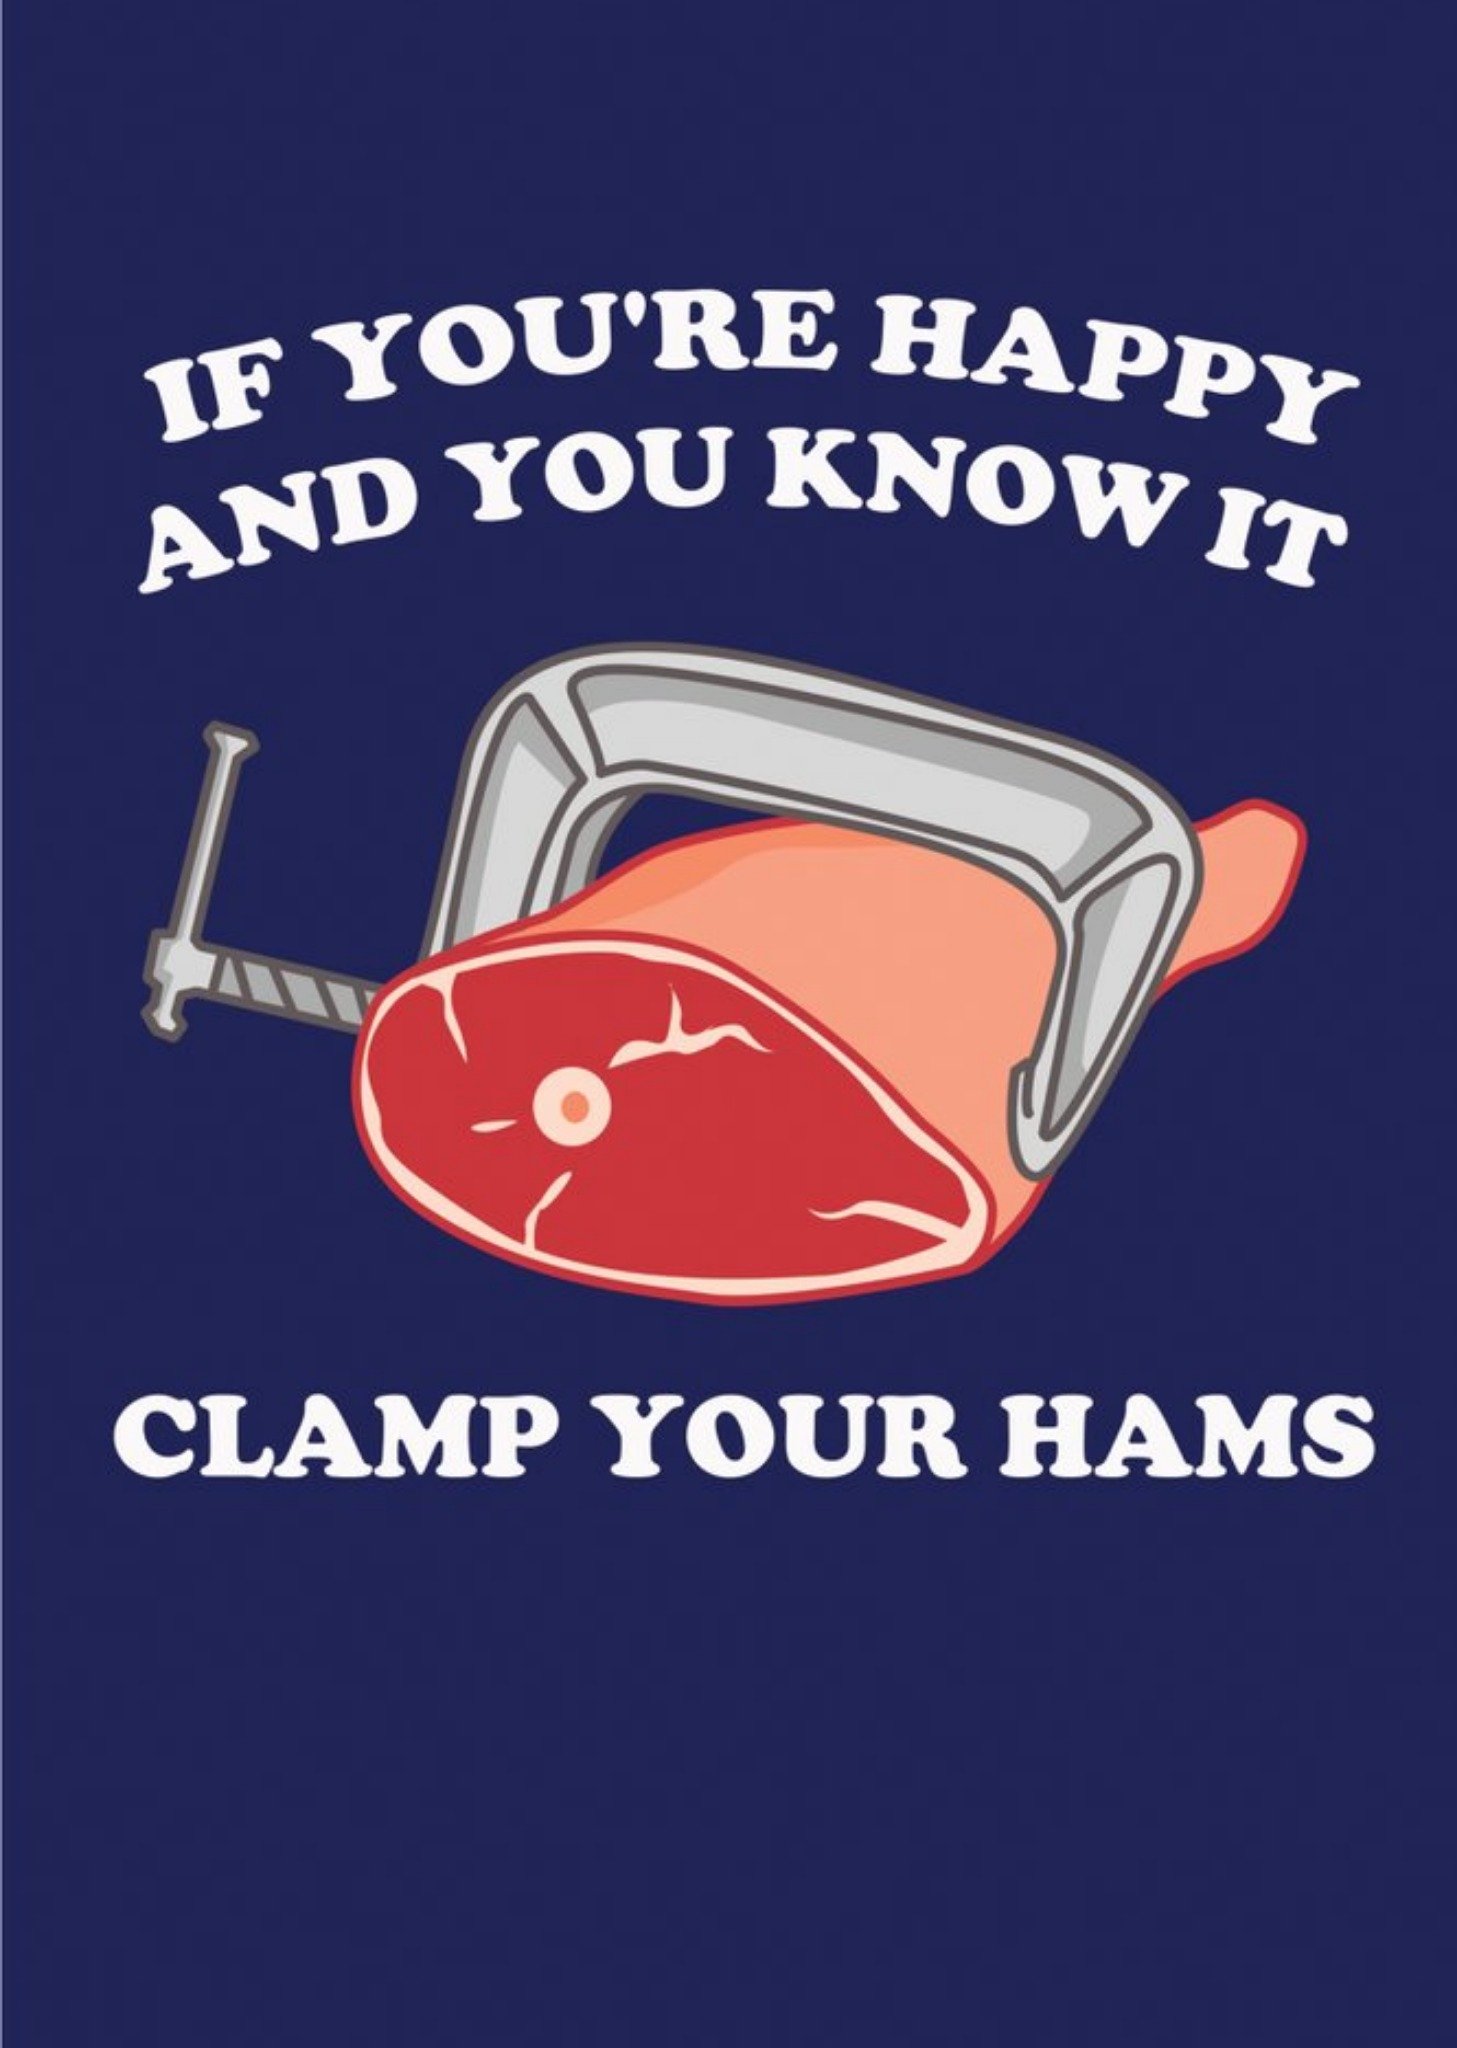 Brainbox Candy Funny Happy And You Know It Ham Card, Large